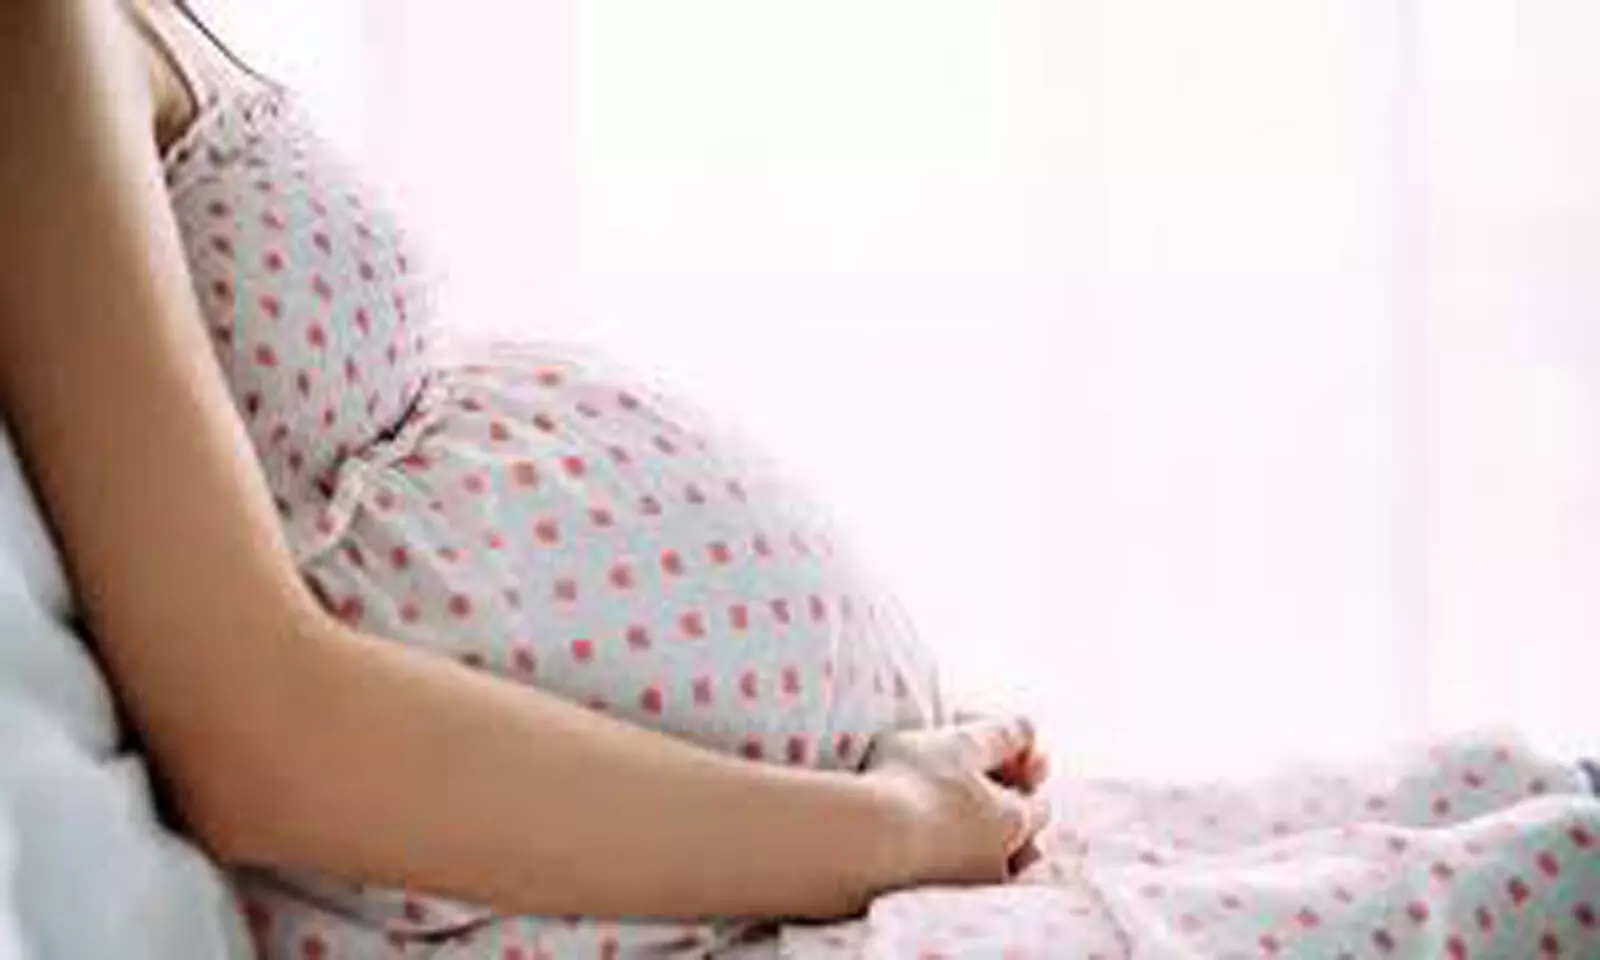 Dental anxiety highly prevalent amongst pregnant women, Finds study